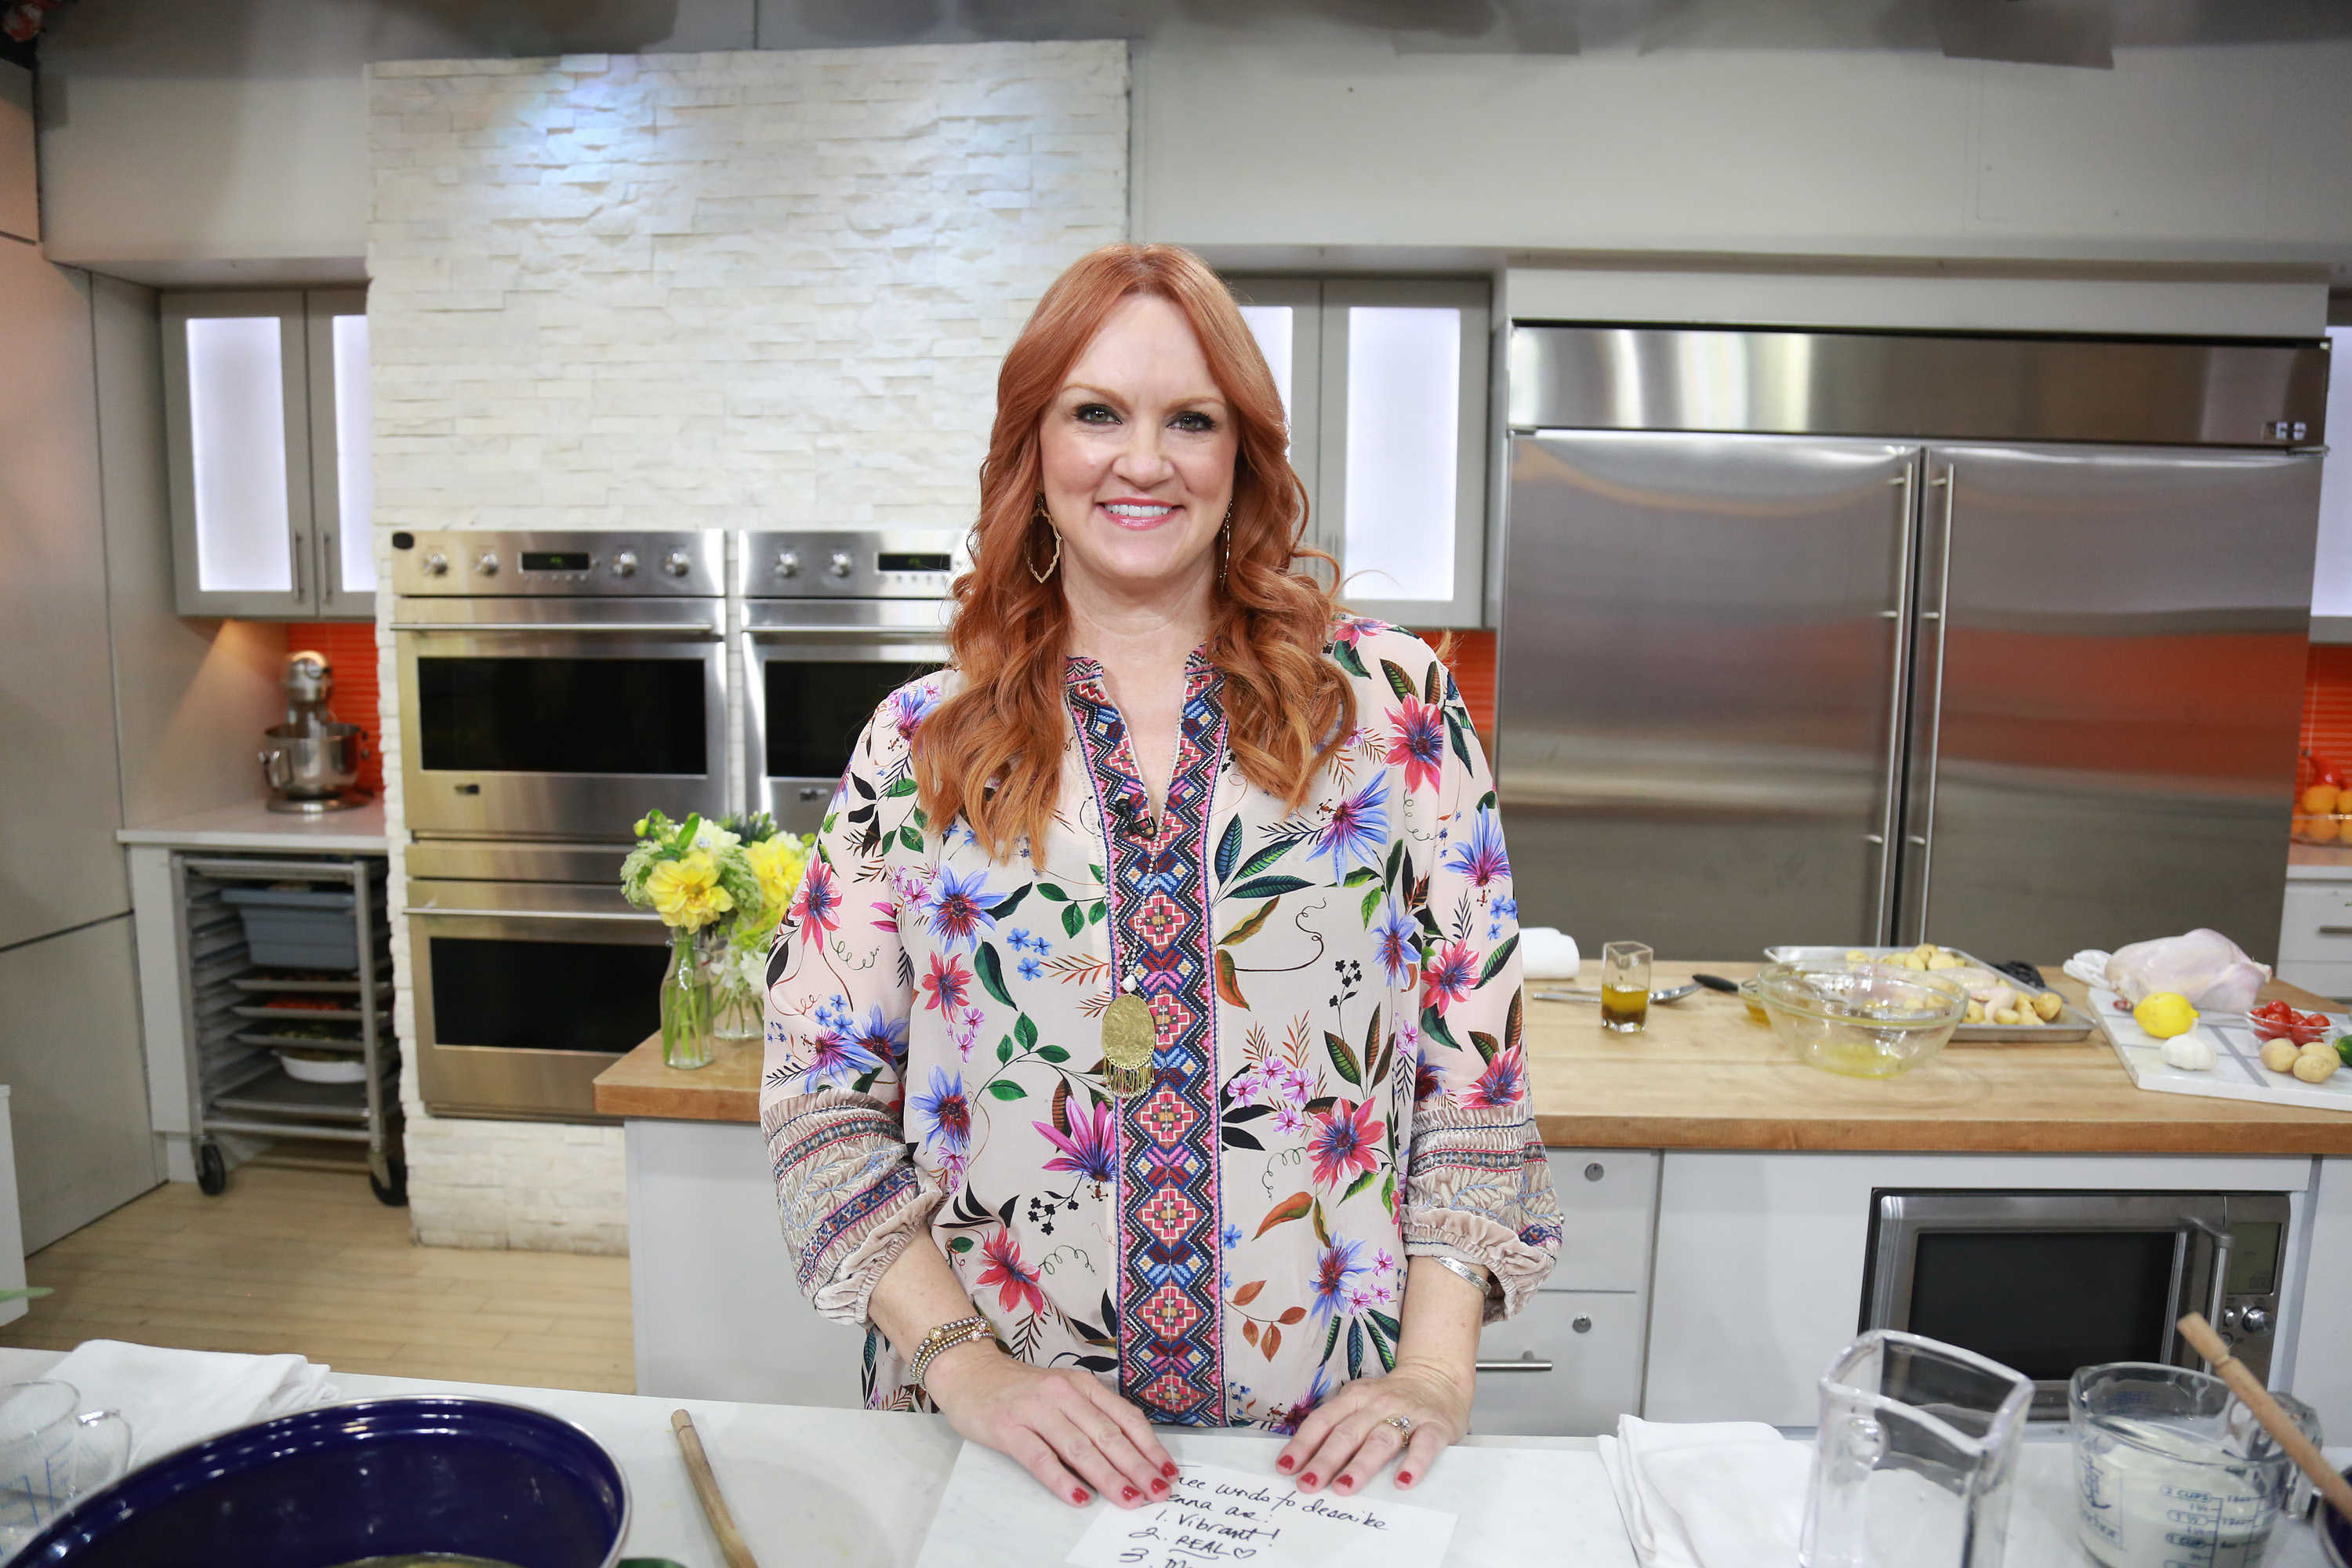 Ree Drummond poses in the kitchen on the 'Today' show.